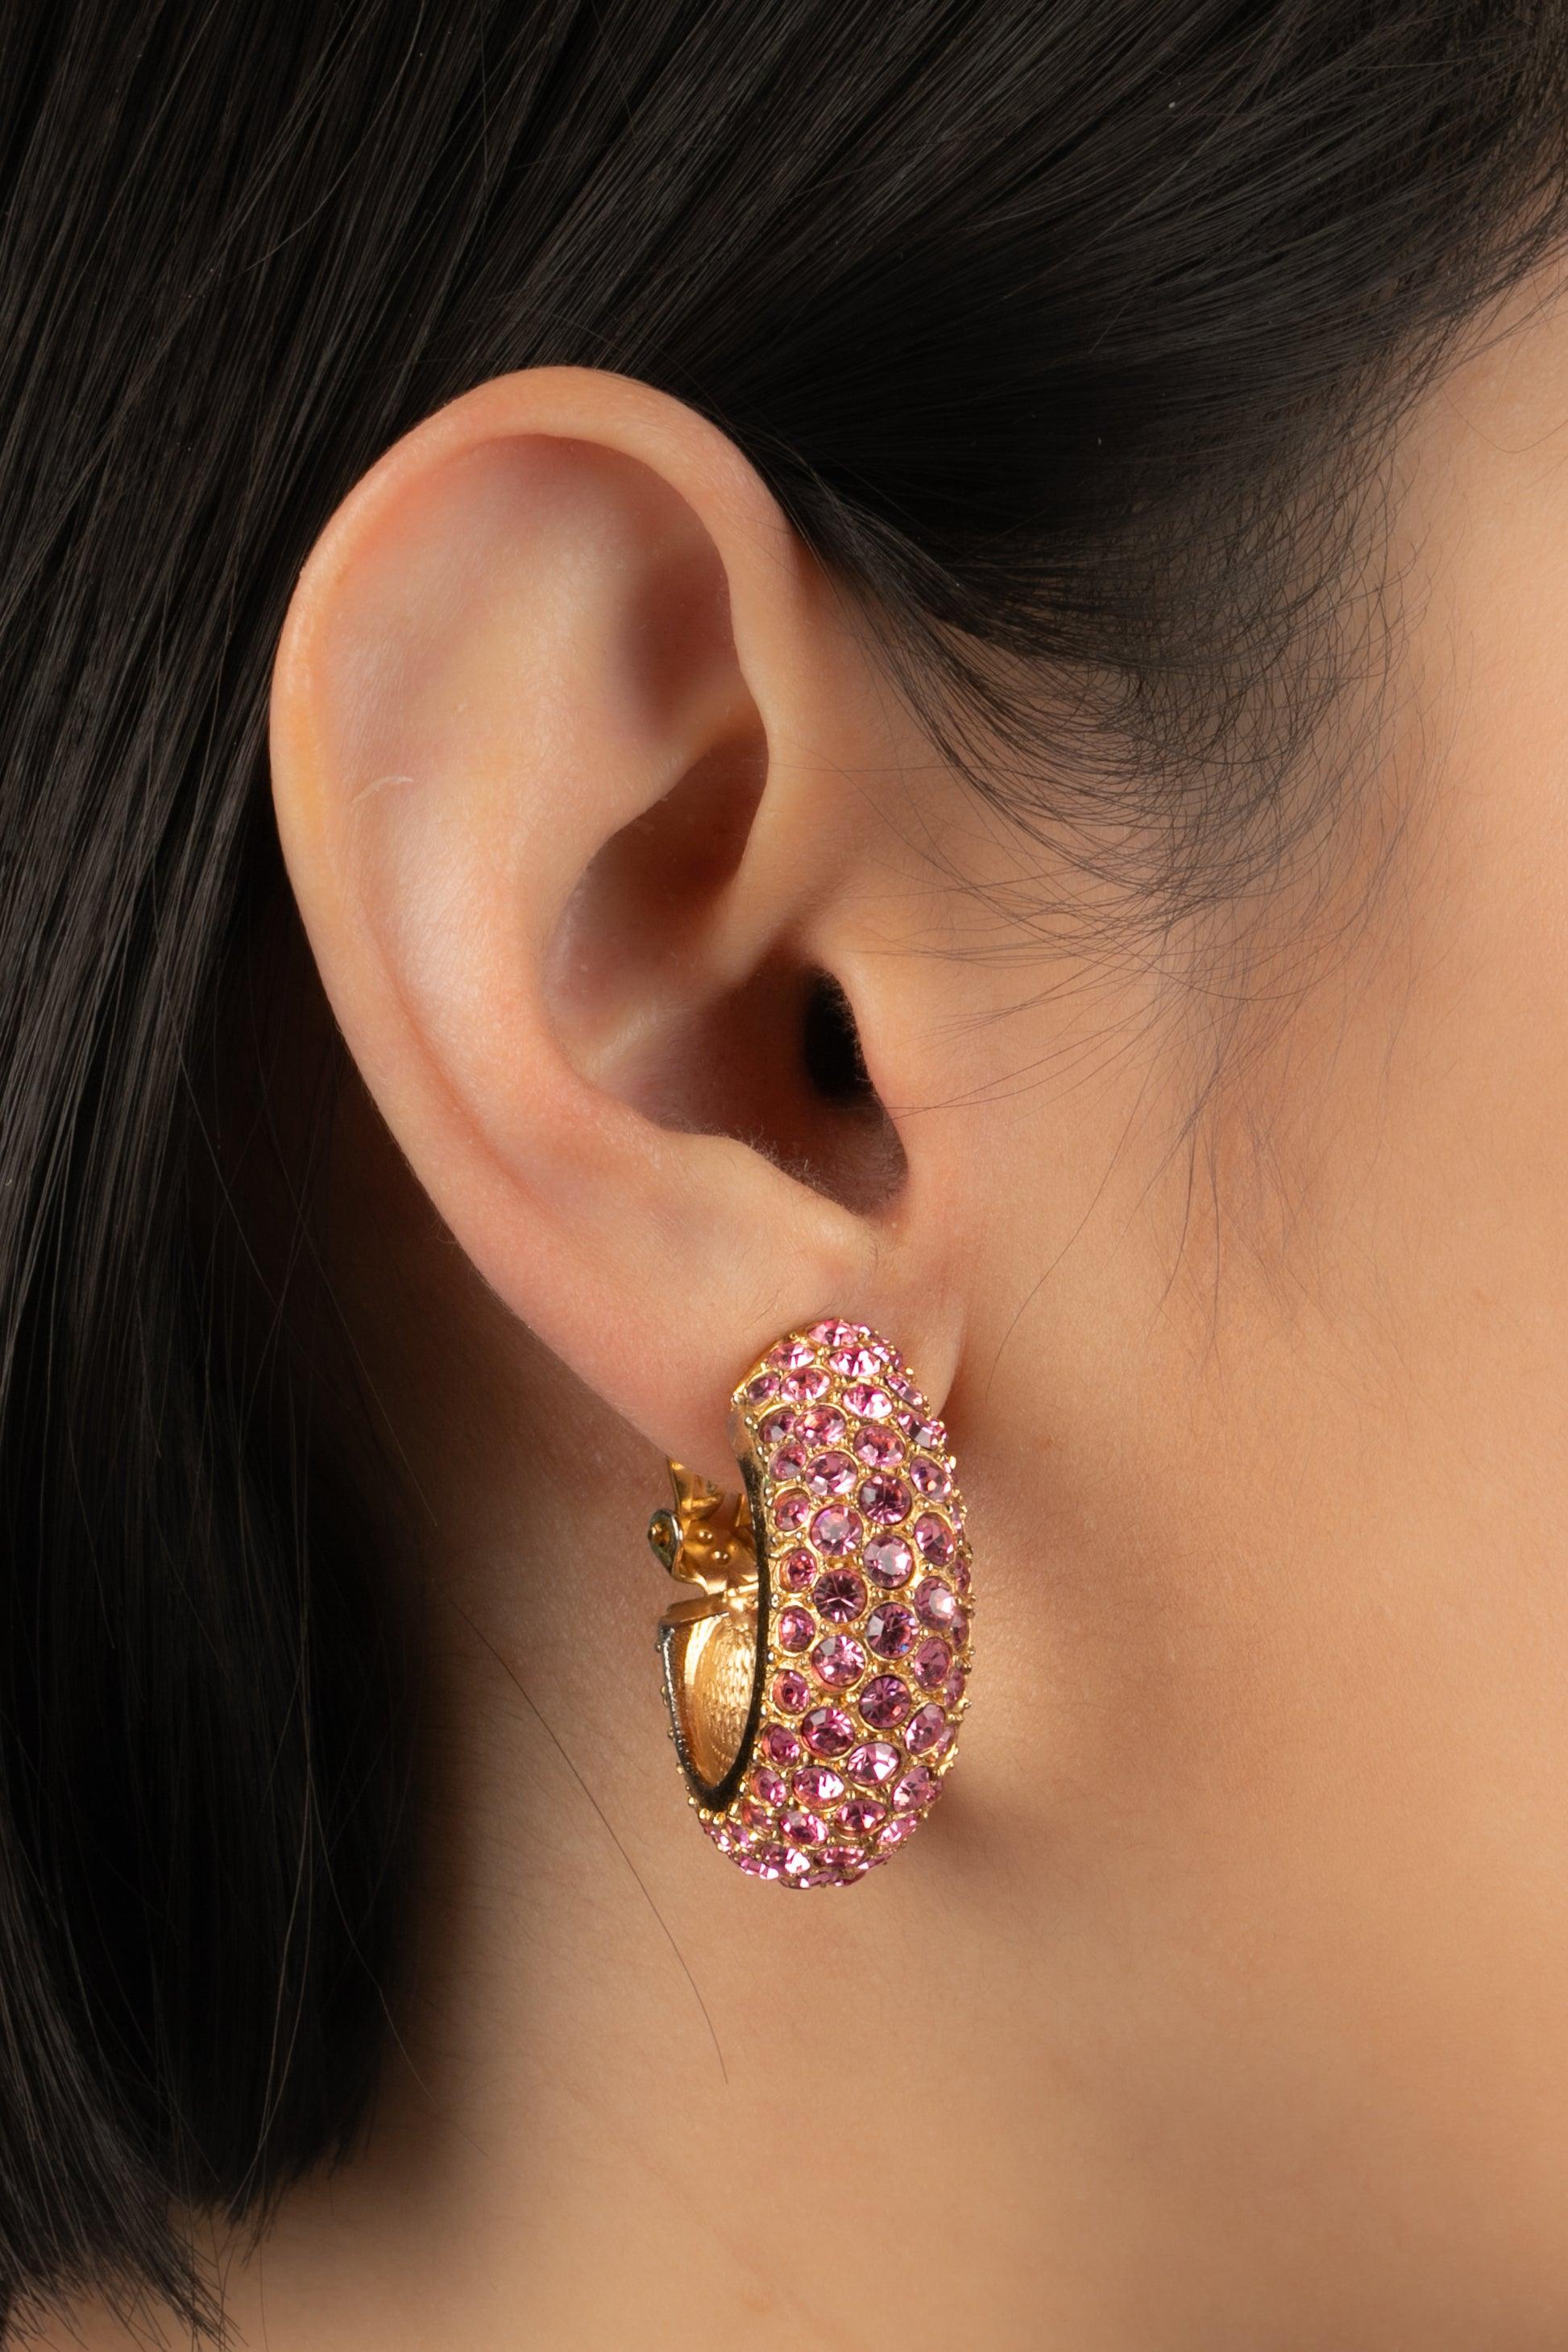 Christian Dior Golden Metal Clip-On Earrings Ornamented with Pink Rhinestones For Sale 2